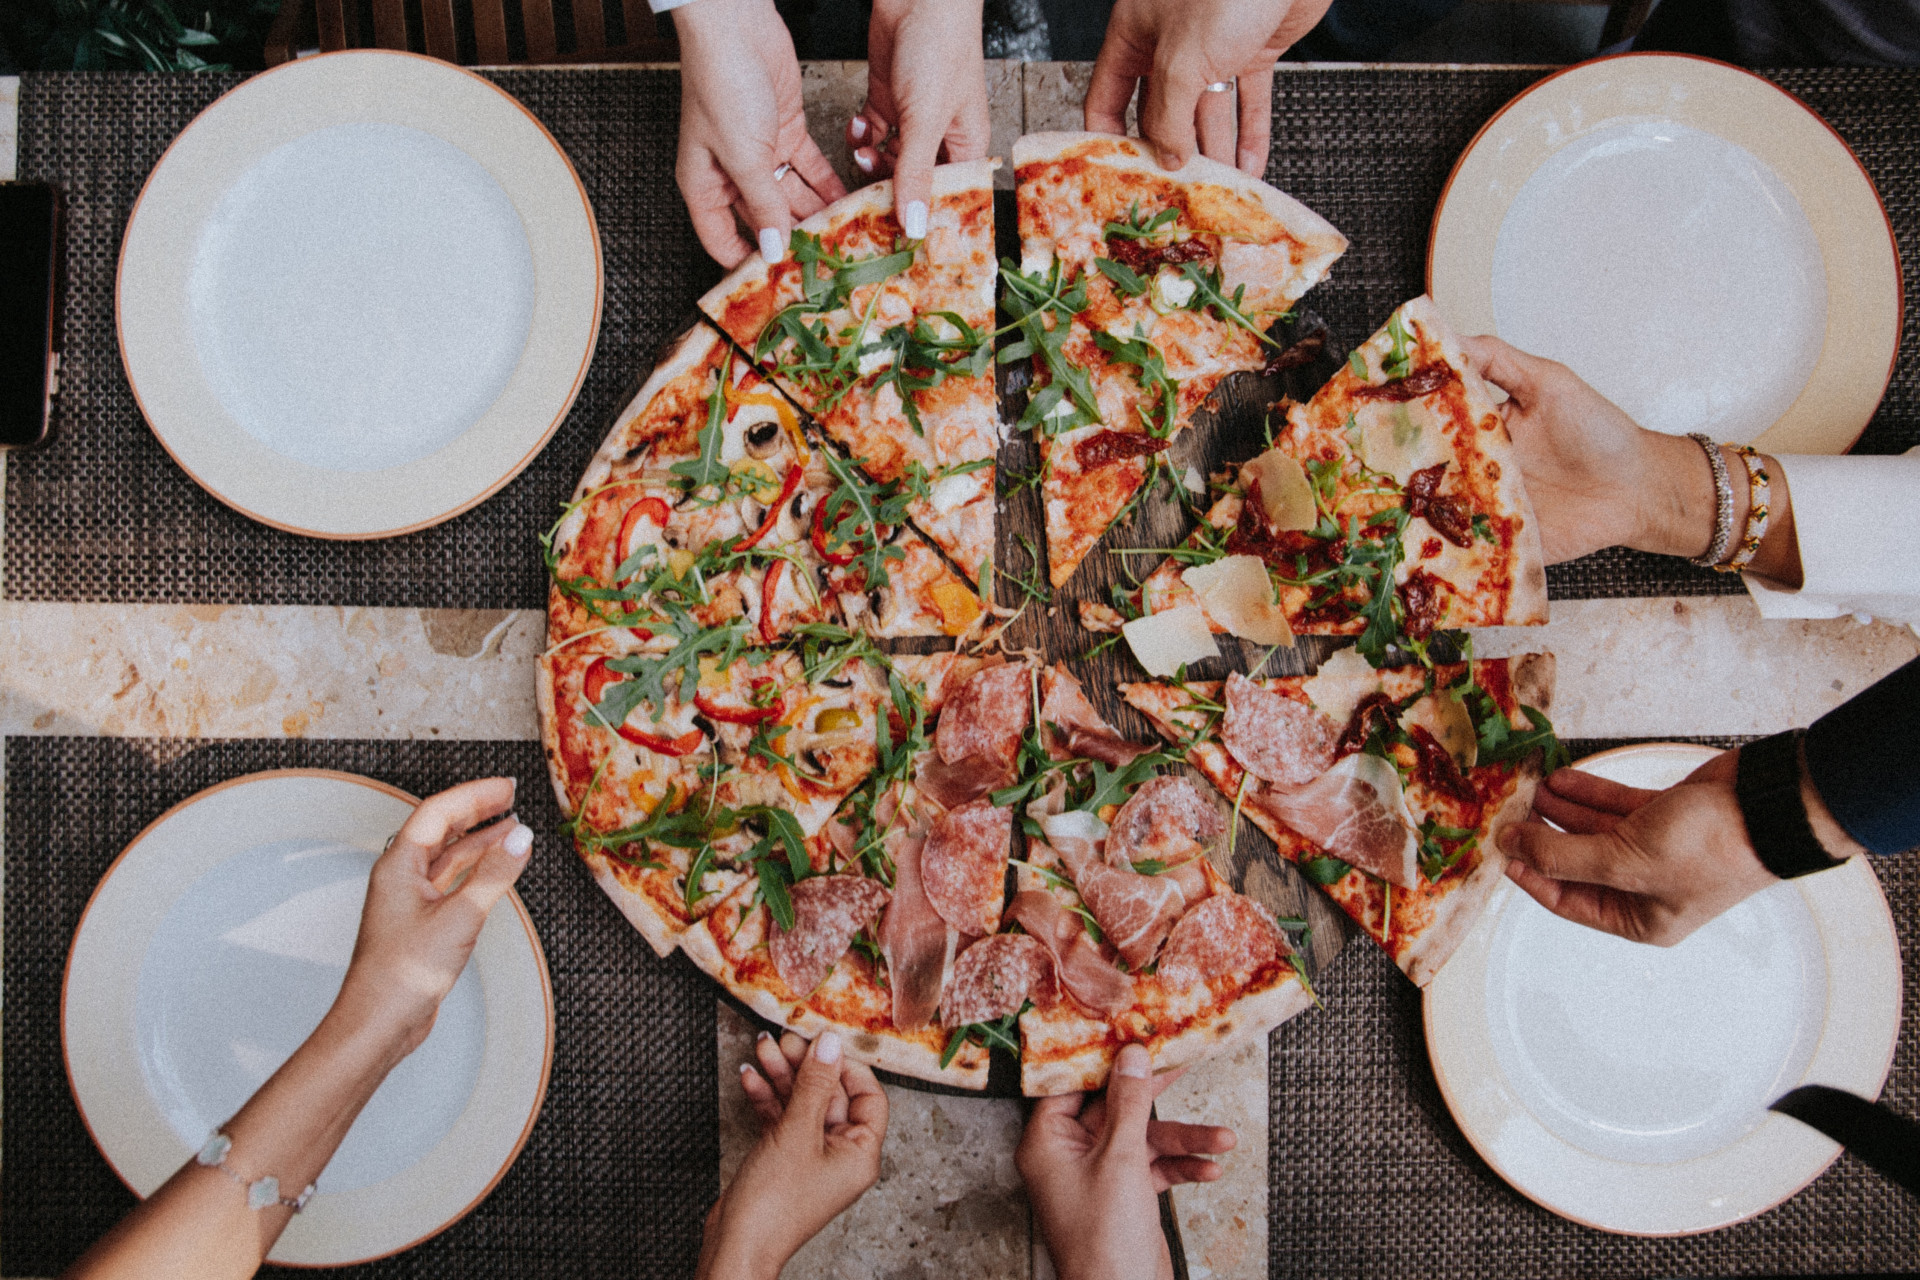 Friends Eating Pizza Image & Photo (Free Trial)